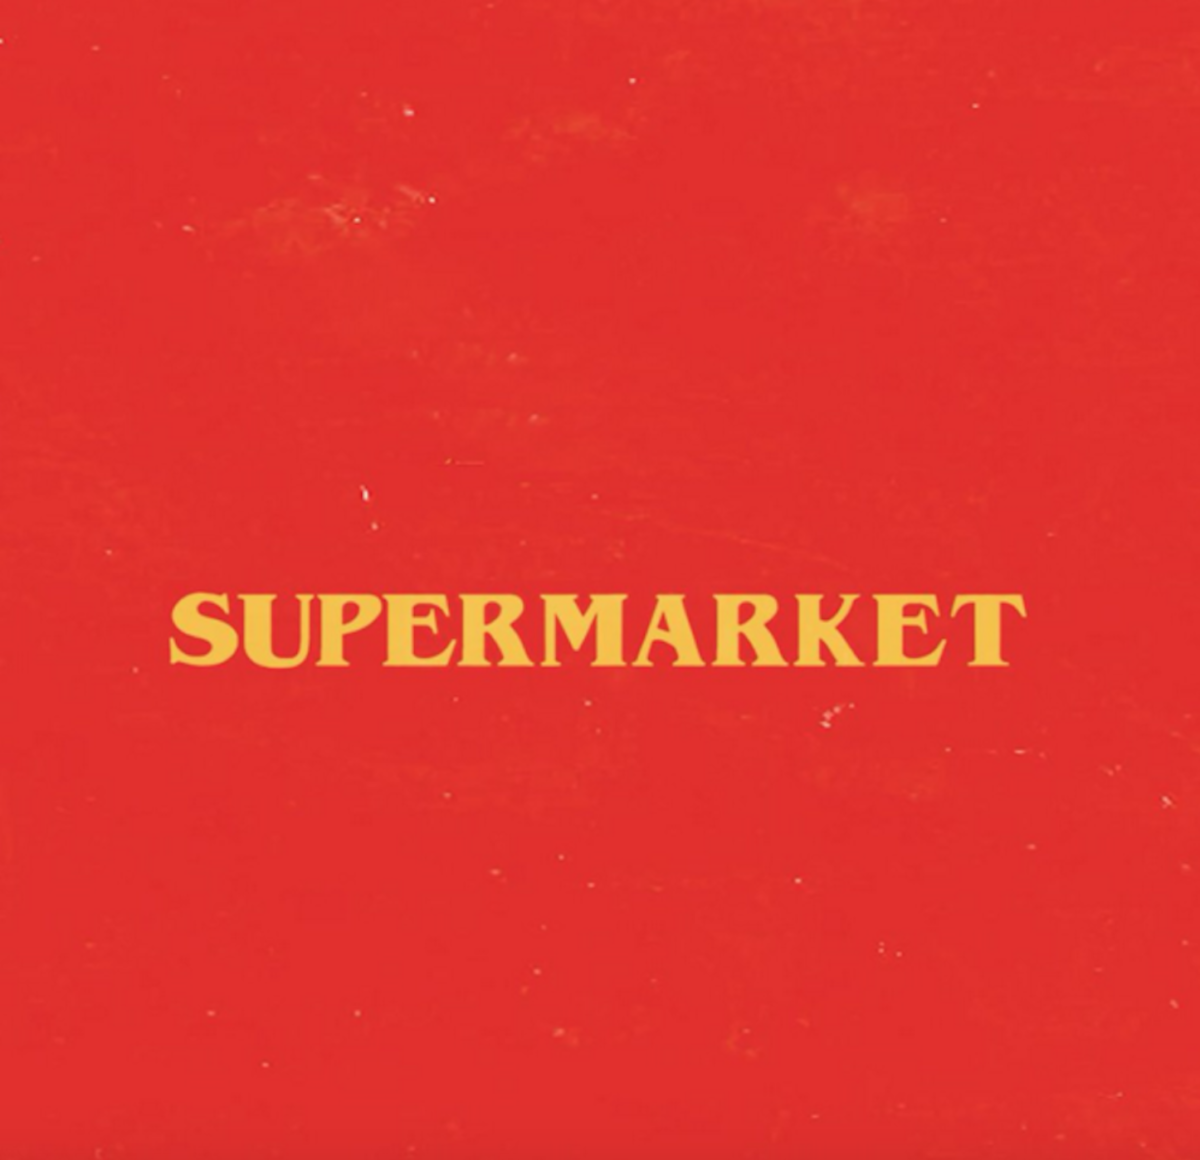 Yellow words that say "Supermarket" on a red background.